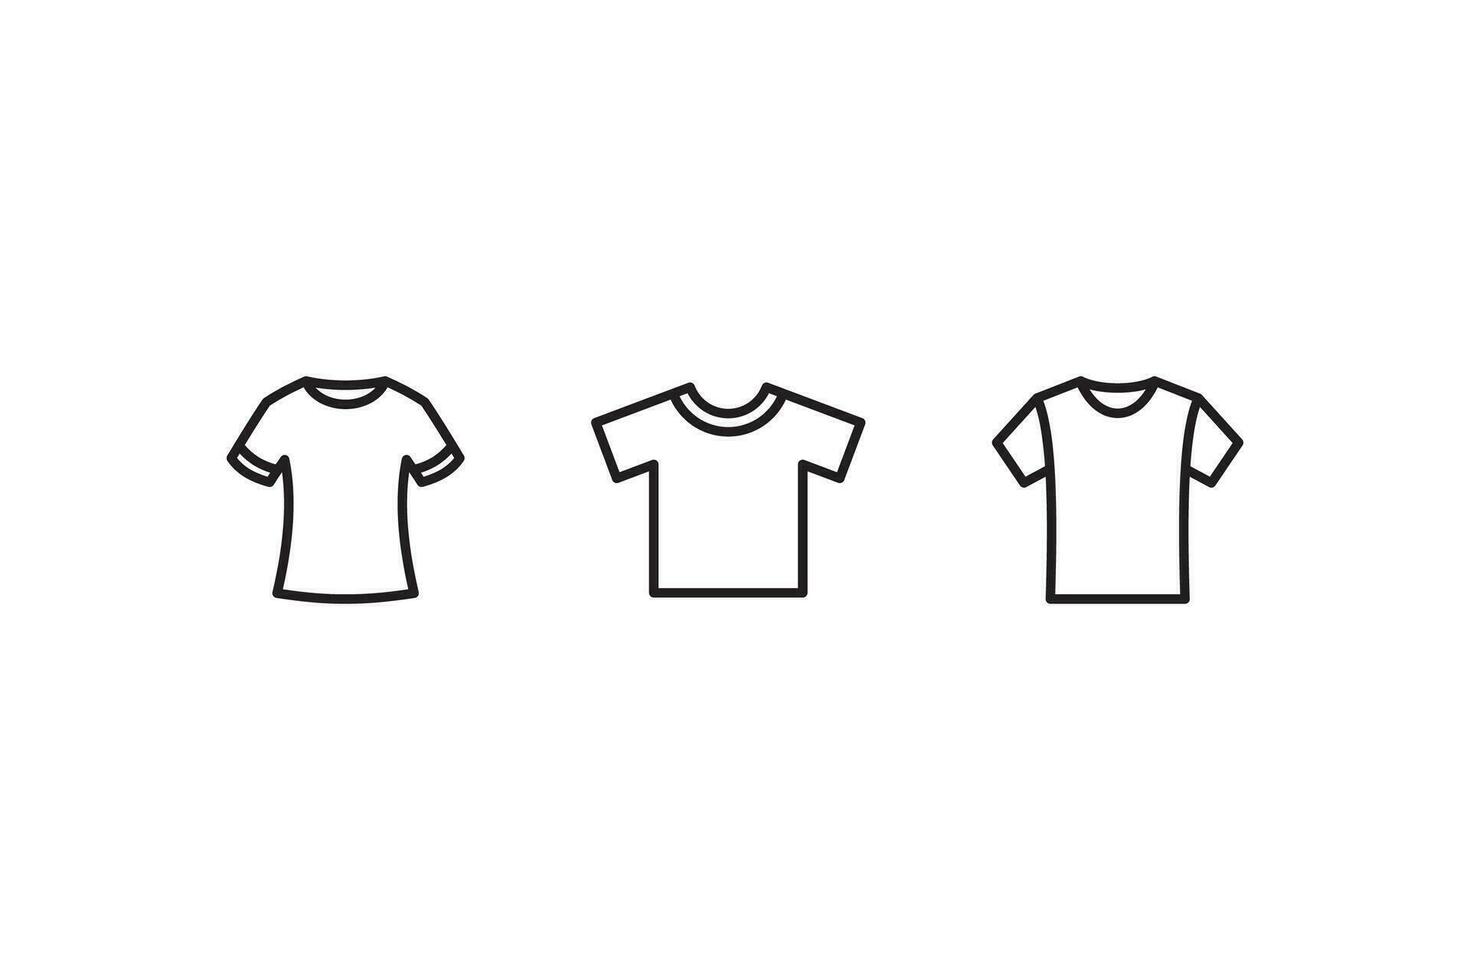 Set of Simple Flat T Shirt Icon Illustration Design, Various T Shirt Symbol Collection with Outlined Style Template Vector